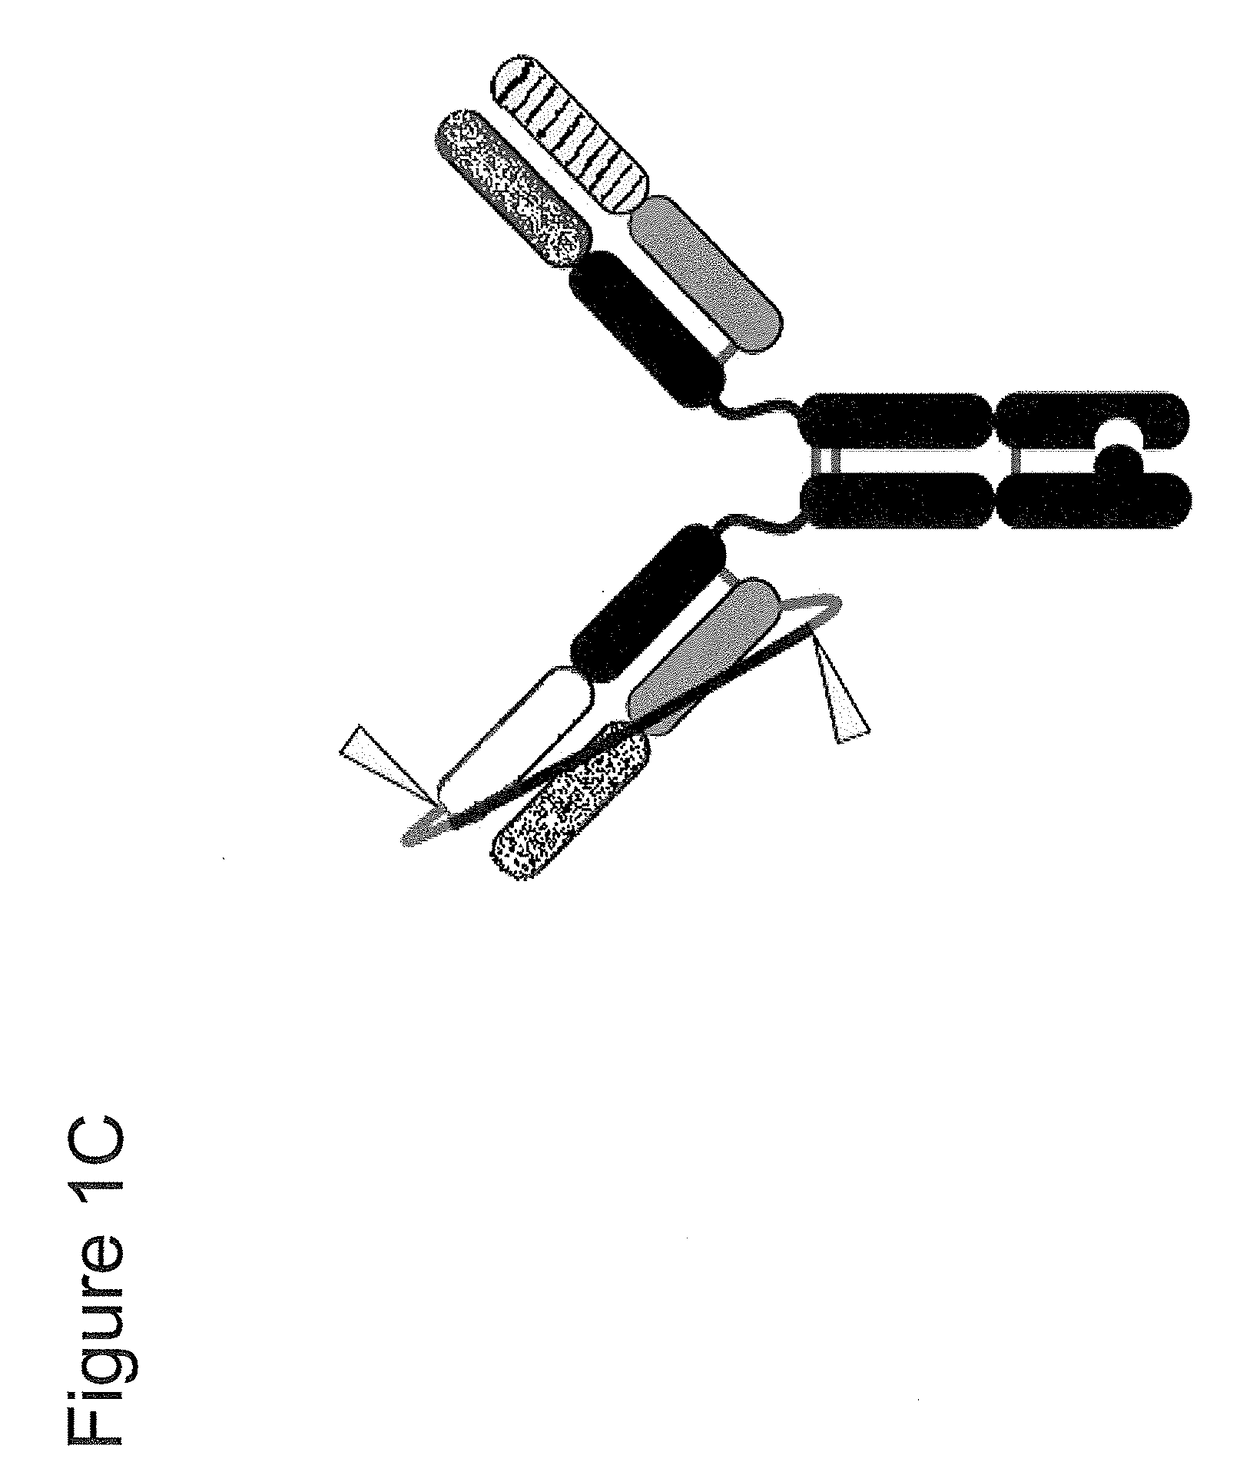 Assembly of bispecific antibodies